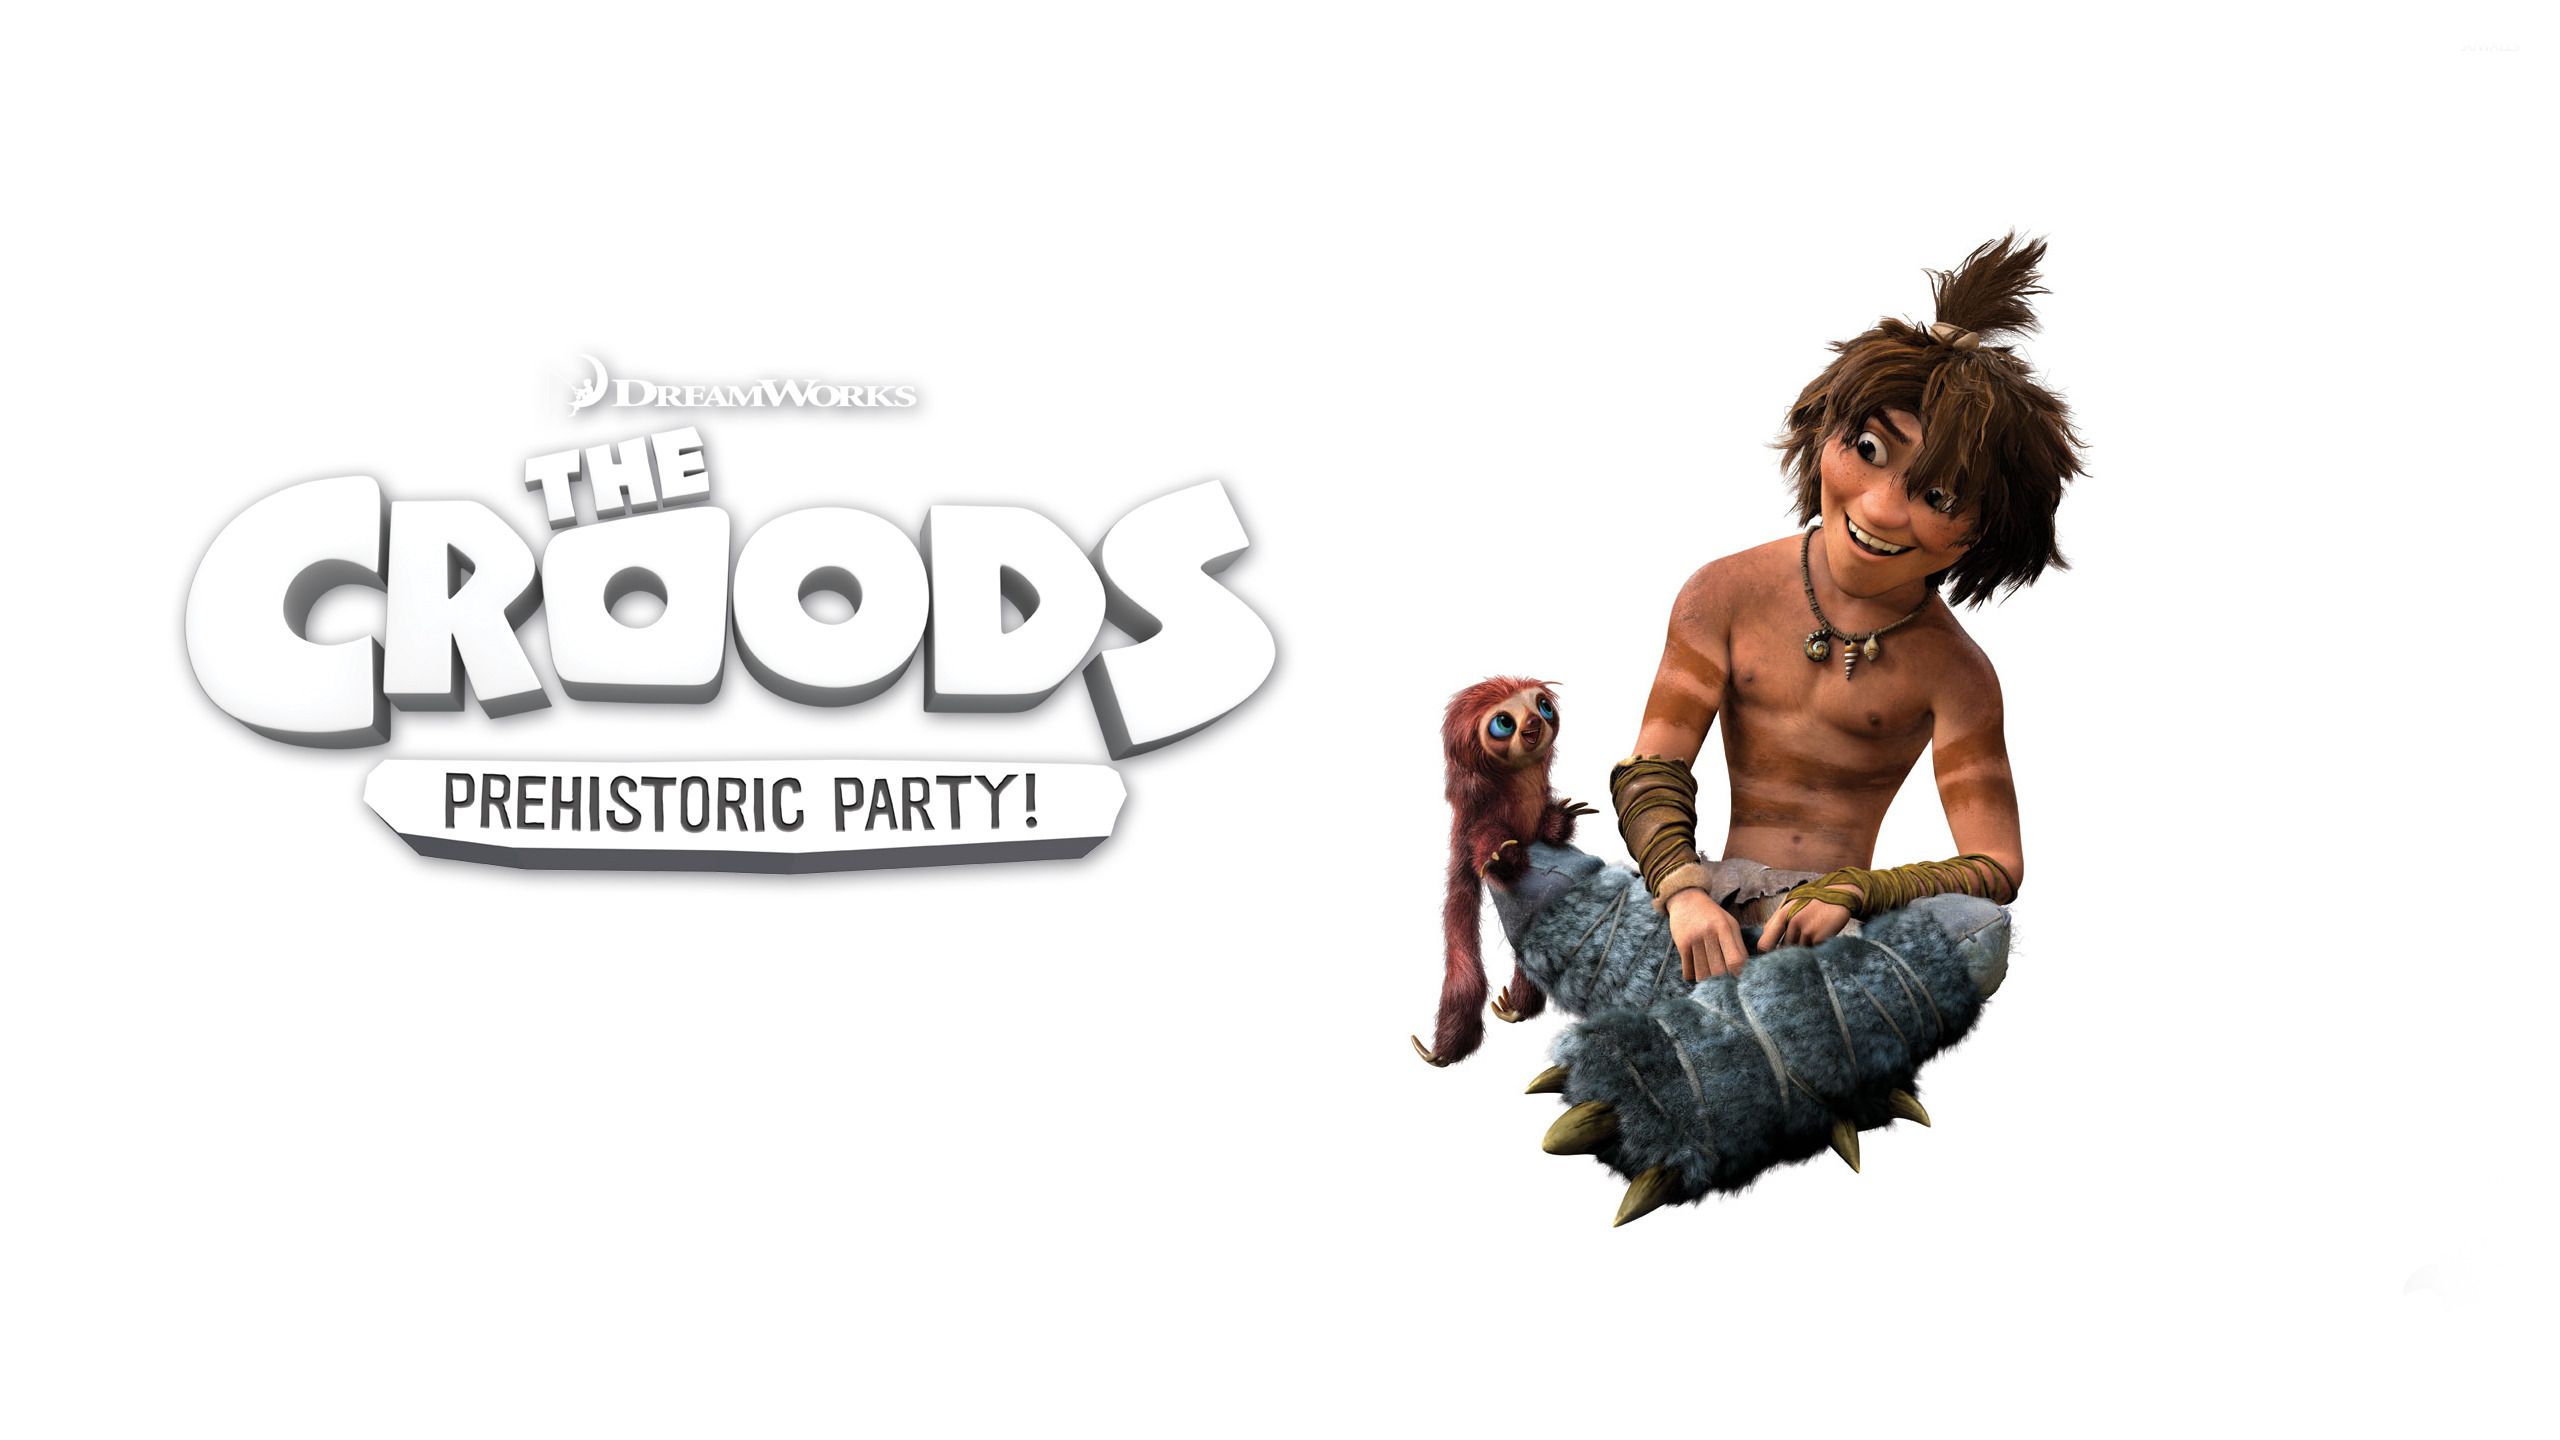 General 2560x1440 The Croods Dreamworks animation movies simple background text digital art